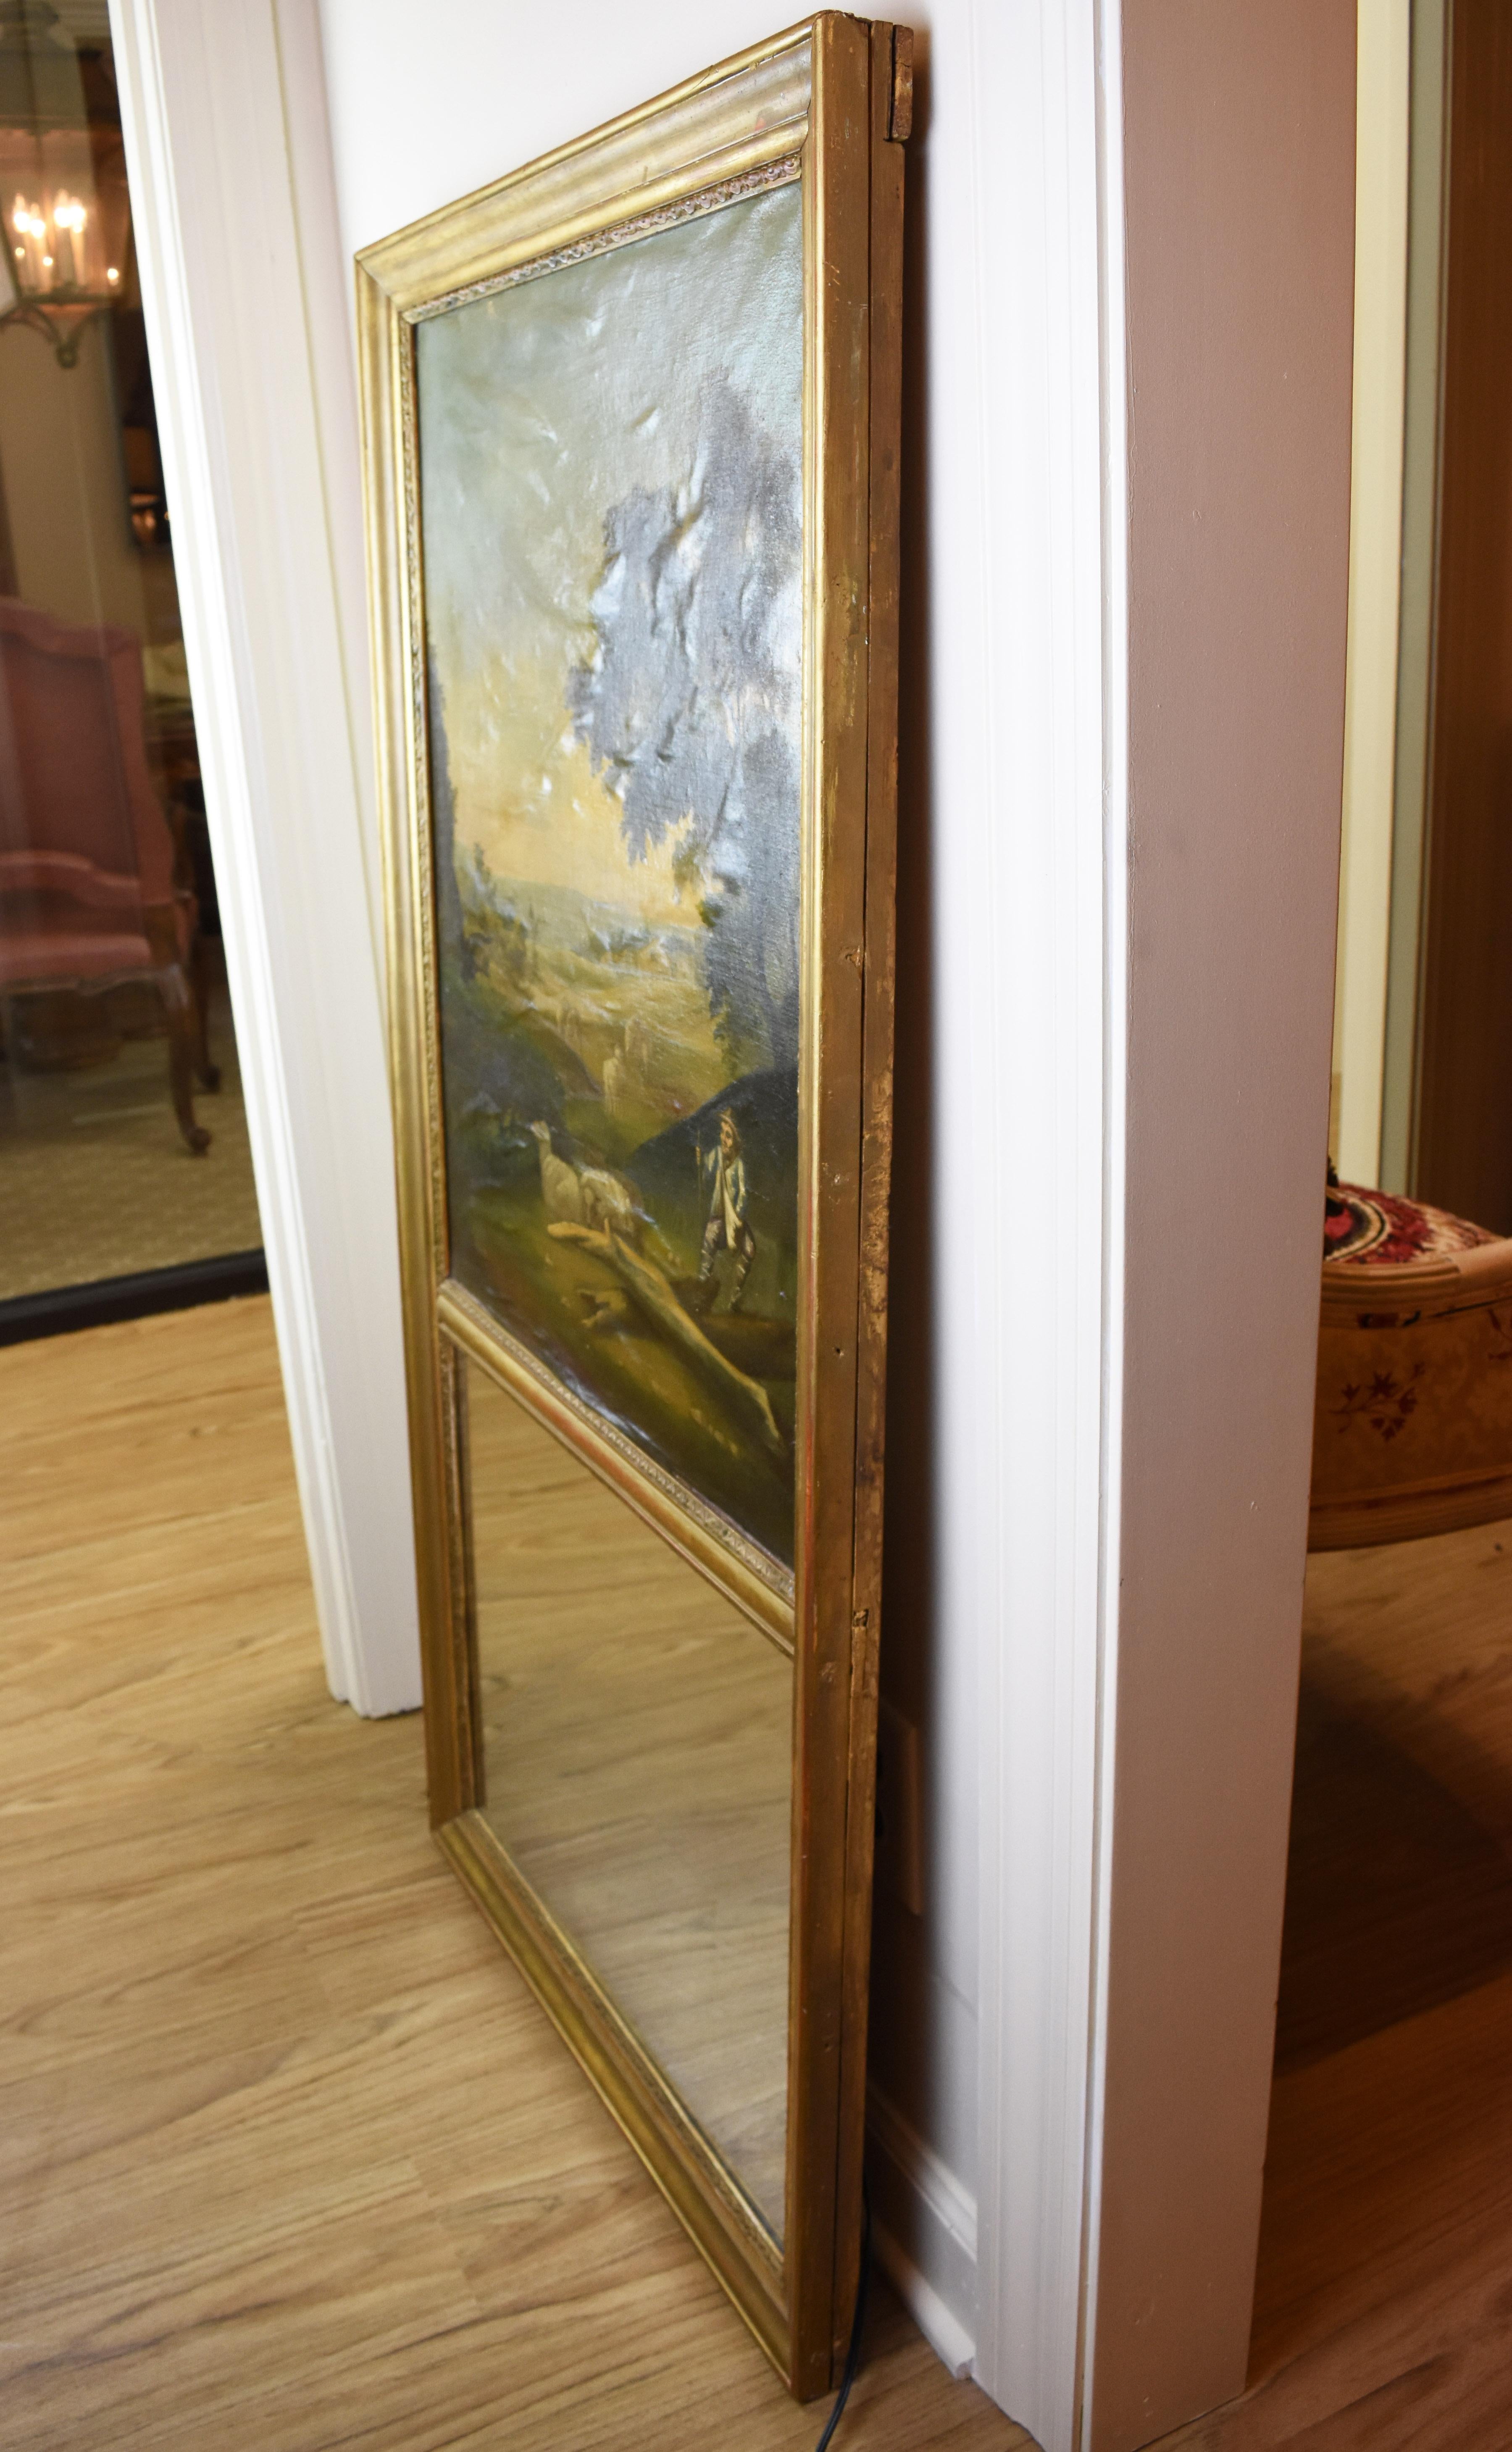 This early 19th century hand-painted Trumeau Mirror features a lovely landscape scene. Both the mirror and the oil painting sit vertically in a simple giltwood frame. There has been some stretching to the canvas such that there are minor wrinkles as